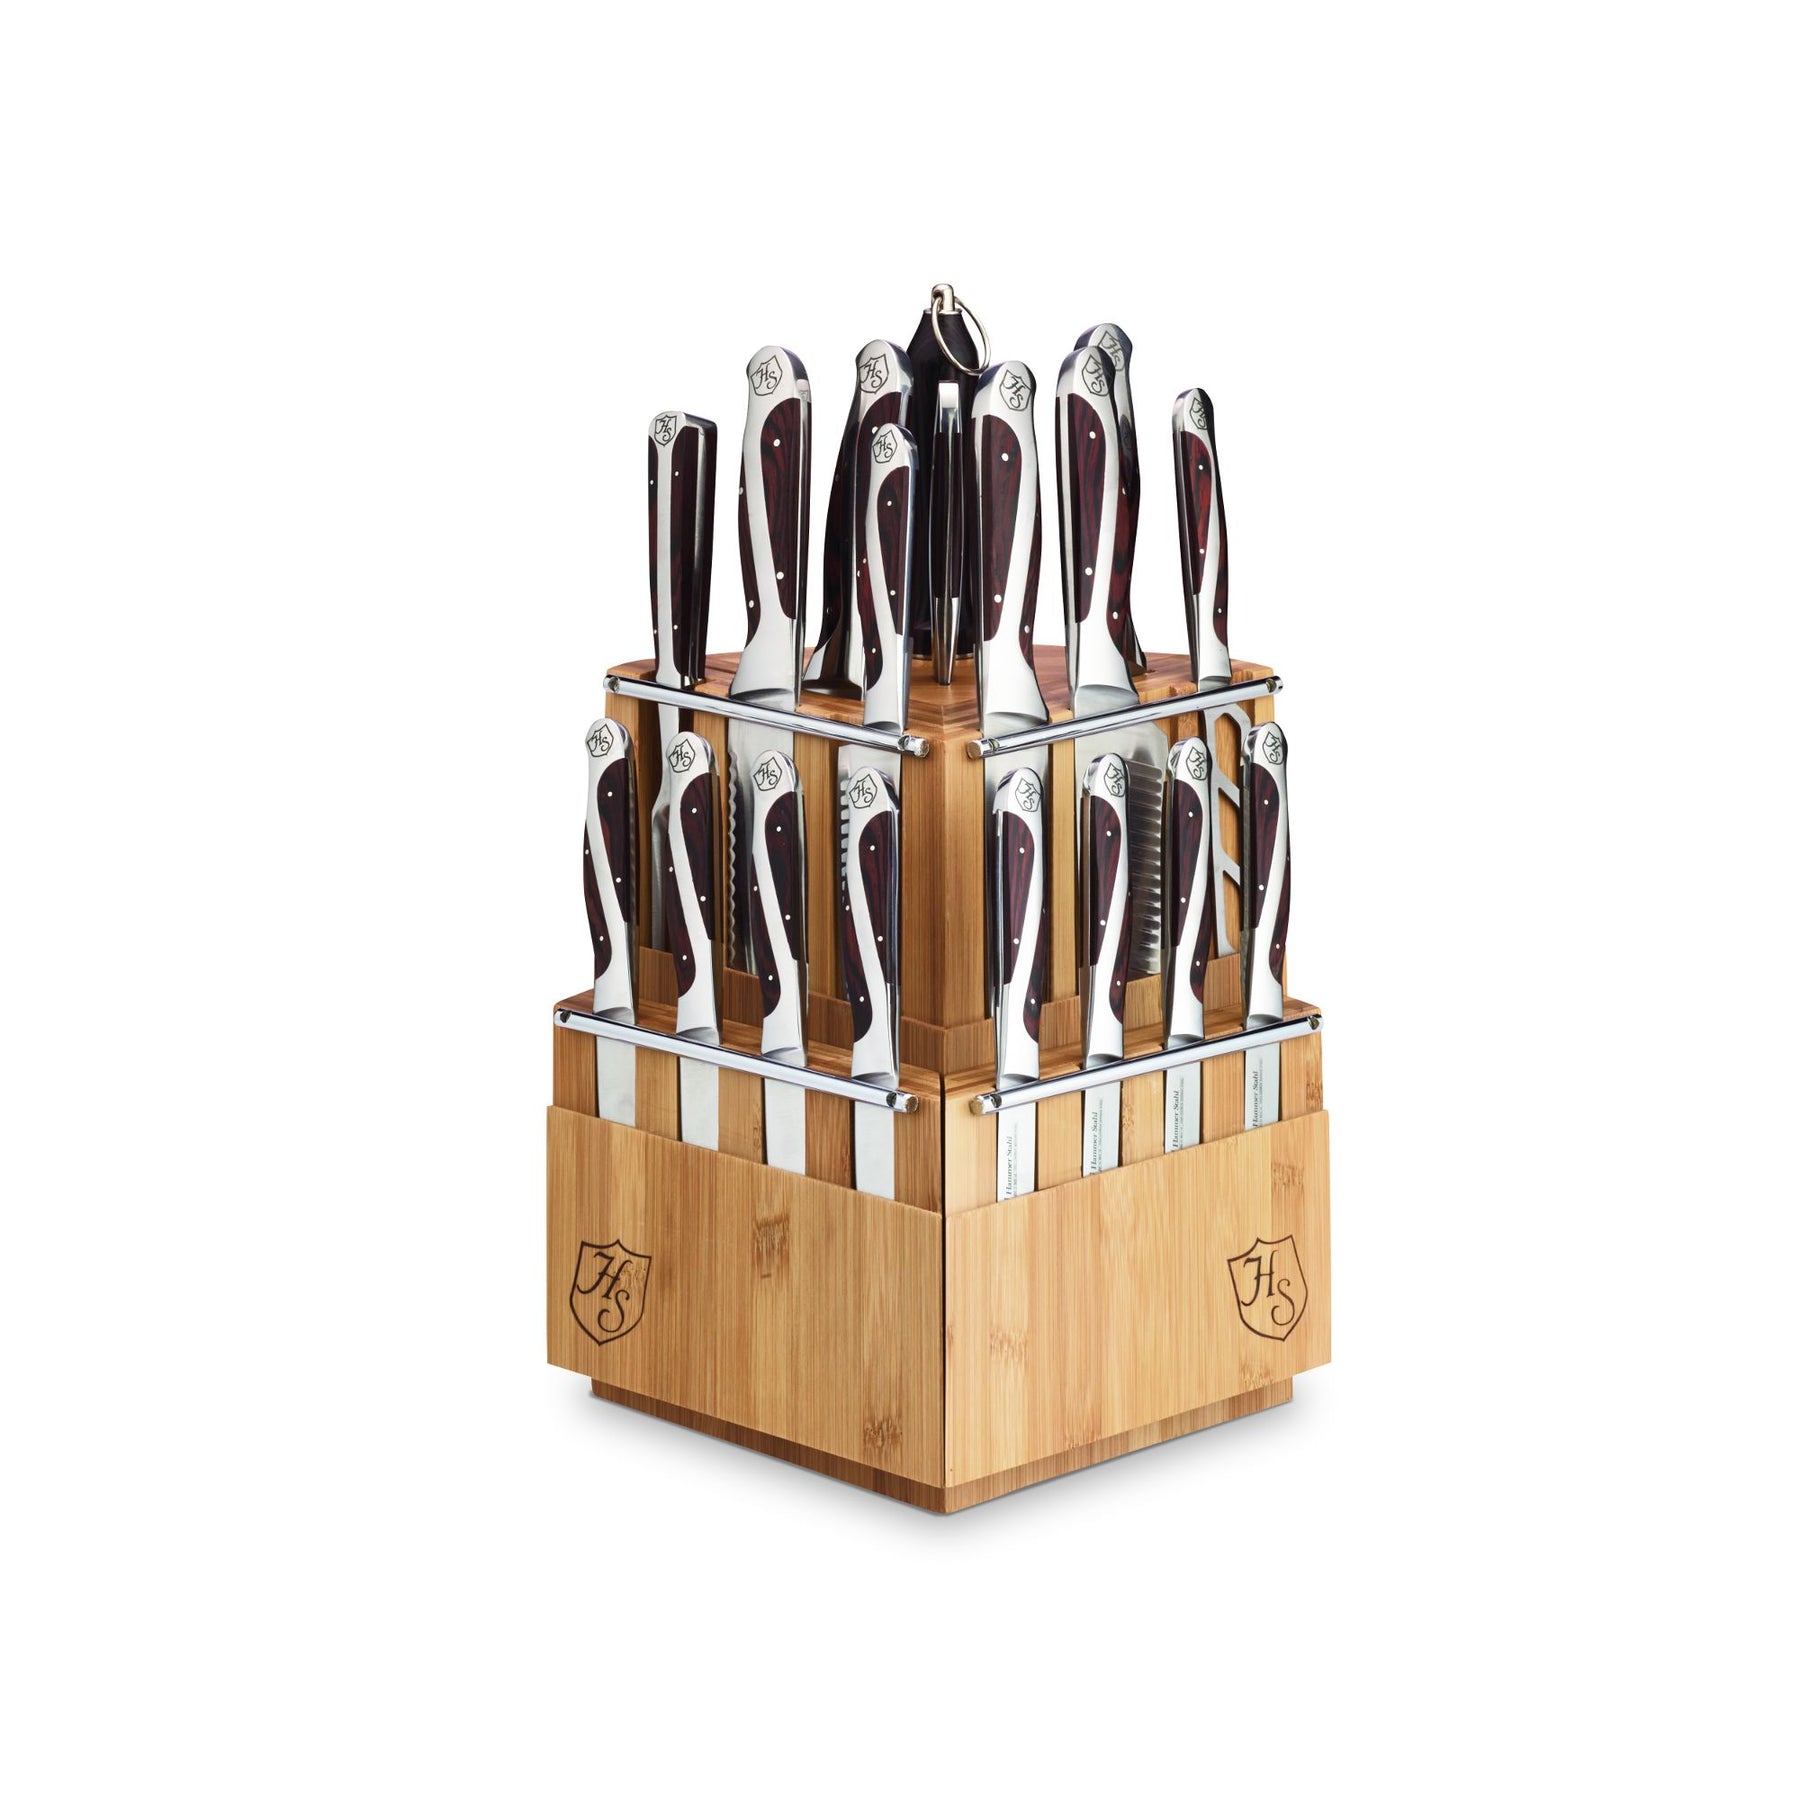 Knife Set, 21 Pieces Kitchen Knife Set with Block Wooden, Germany High Carbon Stainless Steel Professional Chef Knife Block Set, Ultra Sharp, Forged